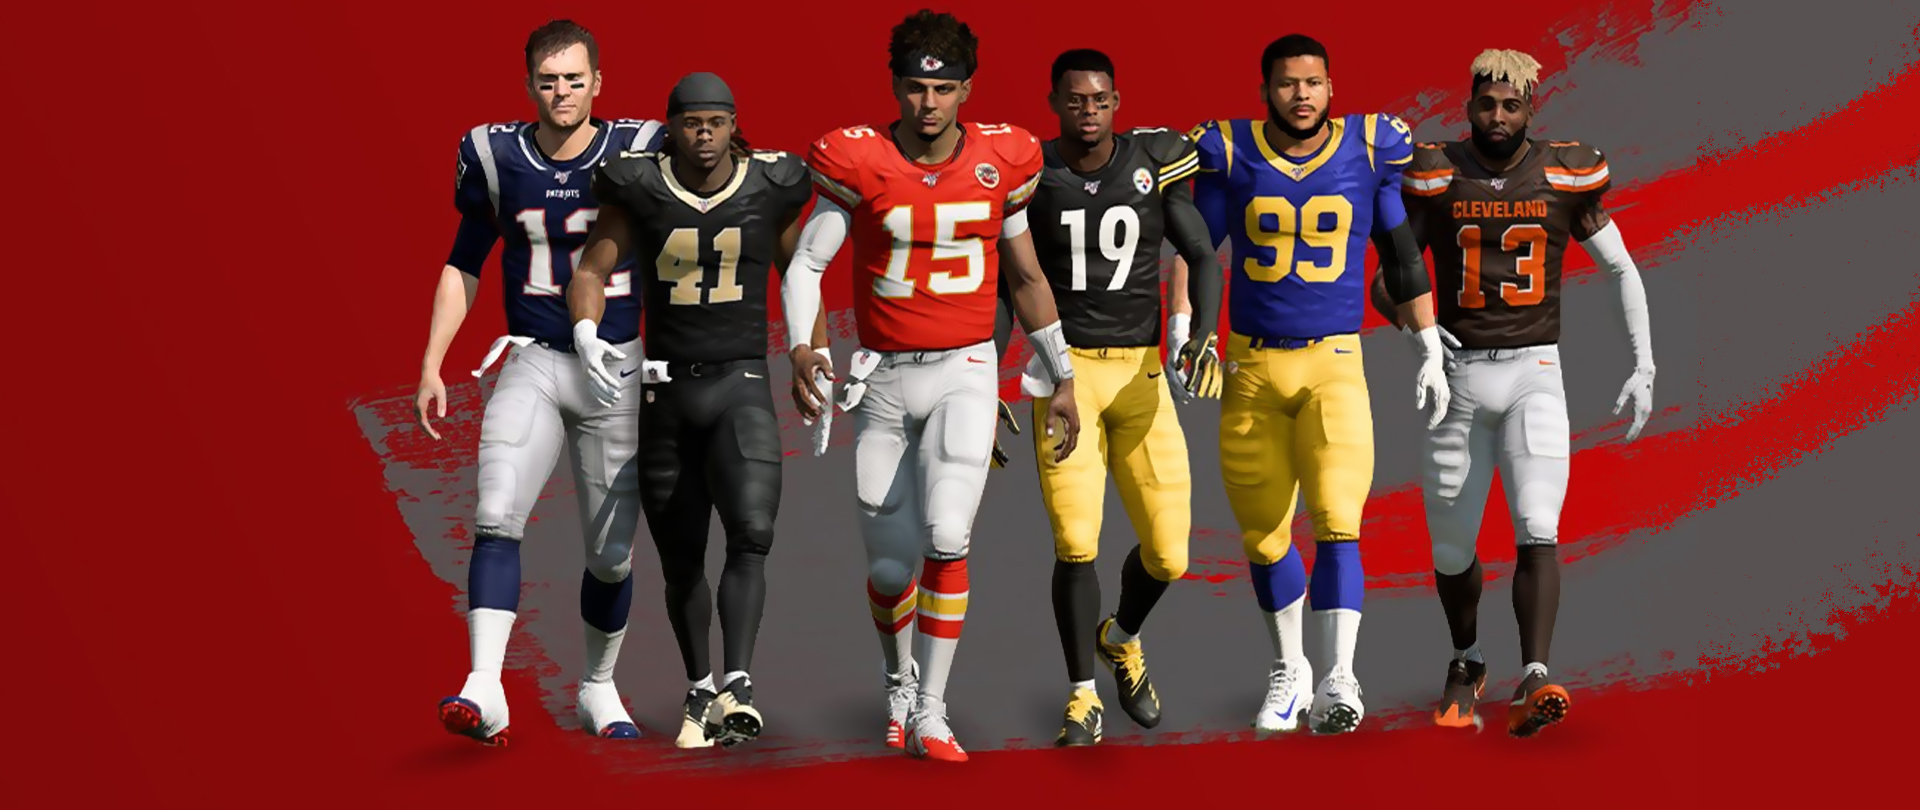 updated madden 23 team ratings